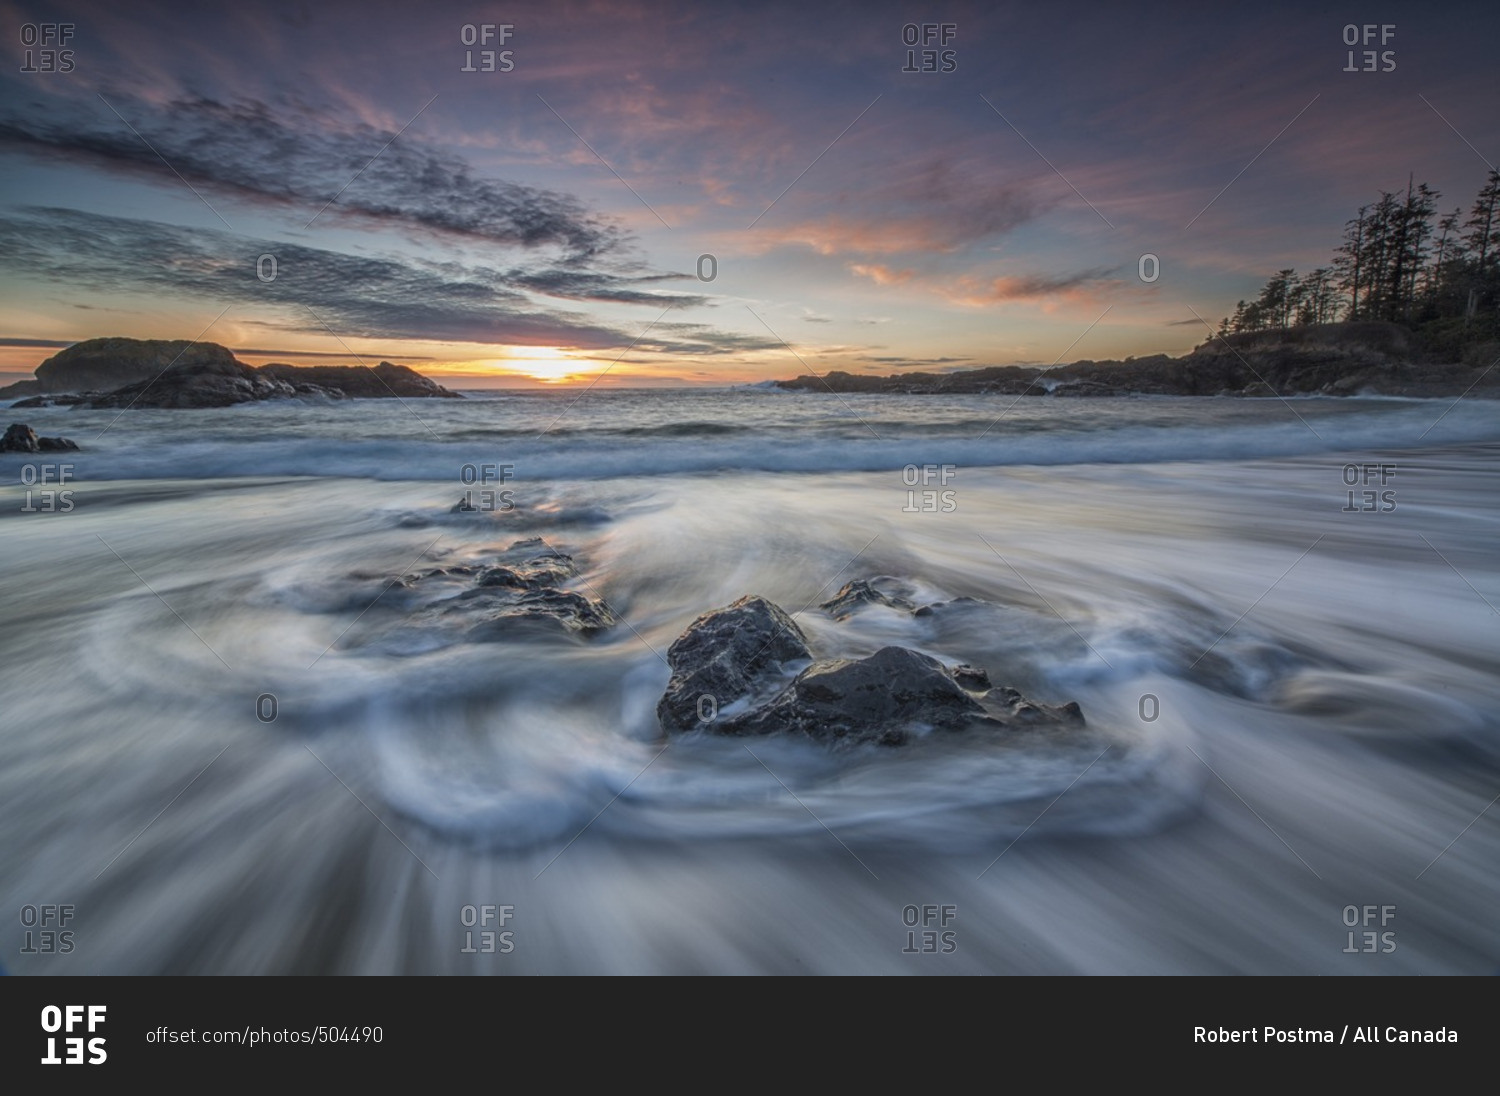 Water flows around the rocks of South Beach as high tide and sunset approaches, Pacific Rim National Park, British Columbia, Canada